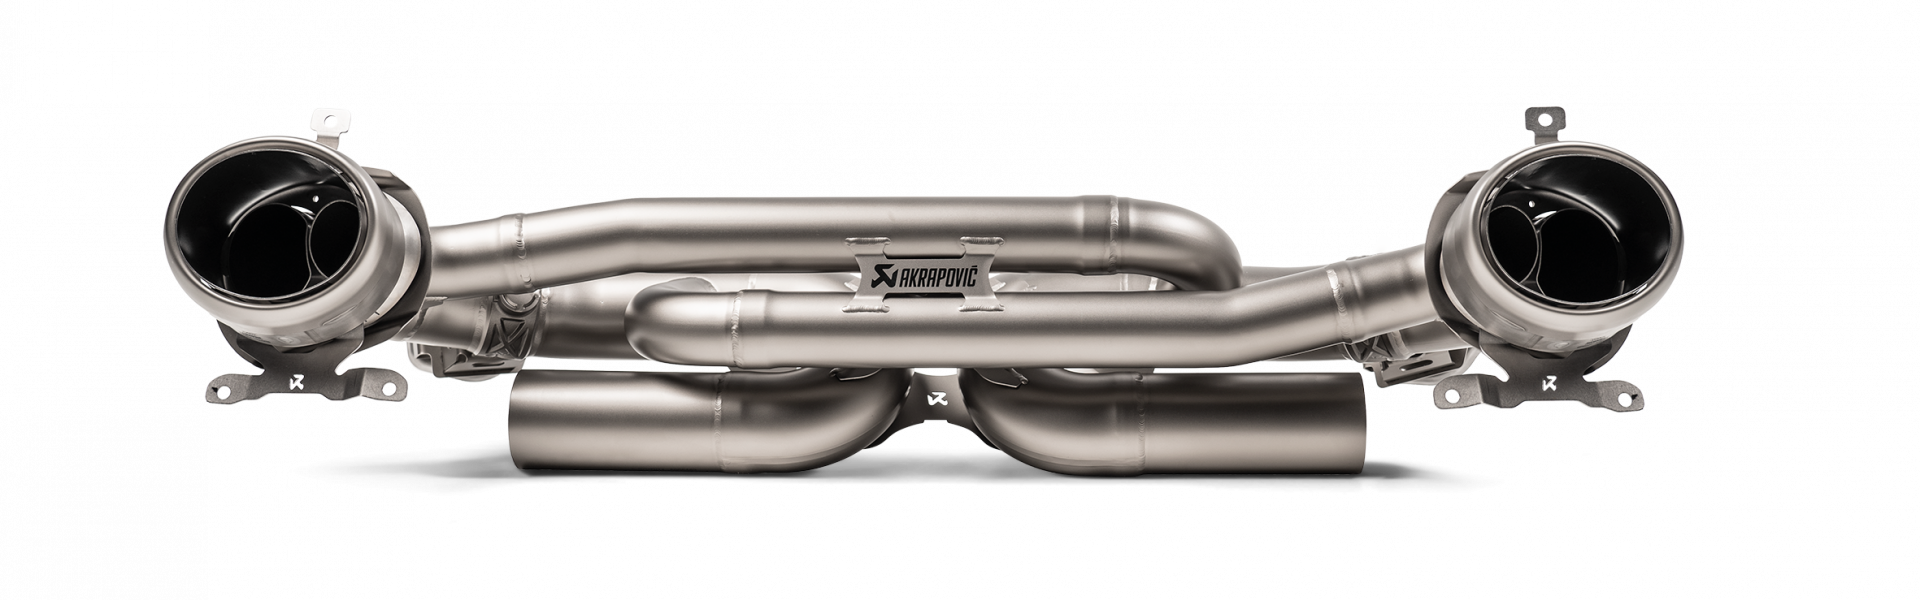 Exhausts for cars